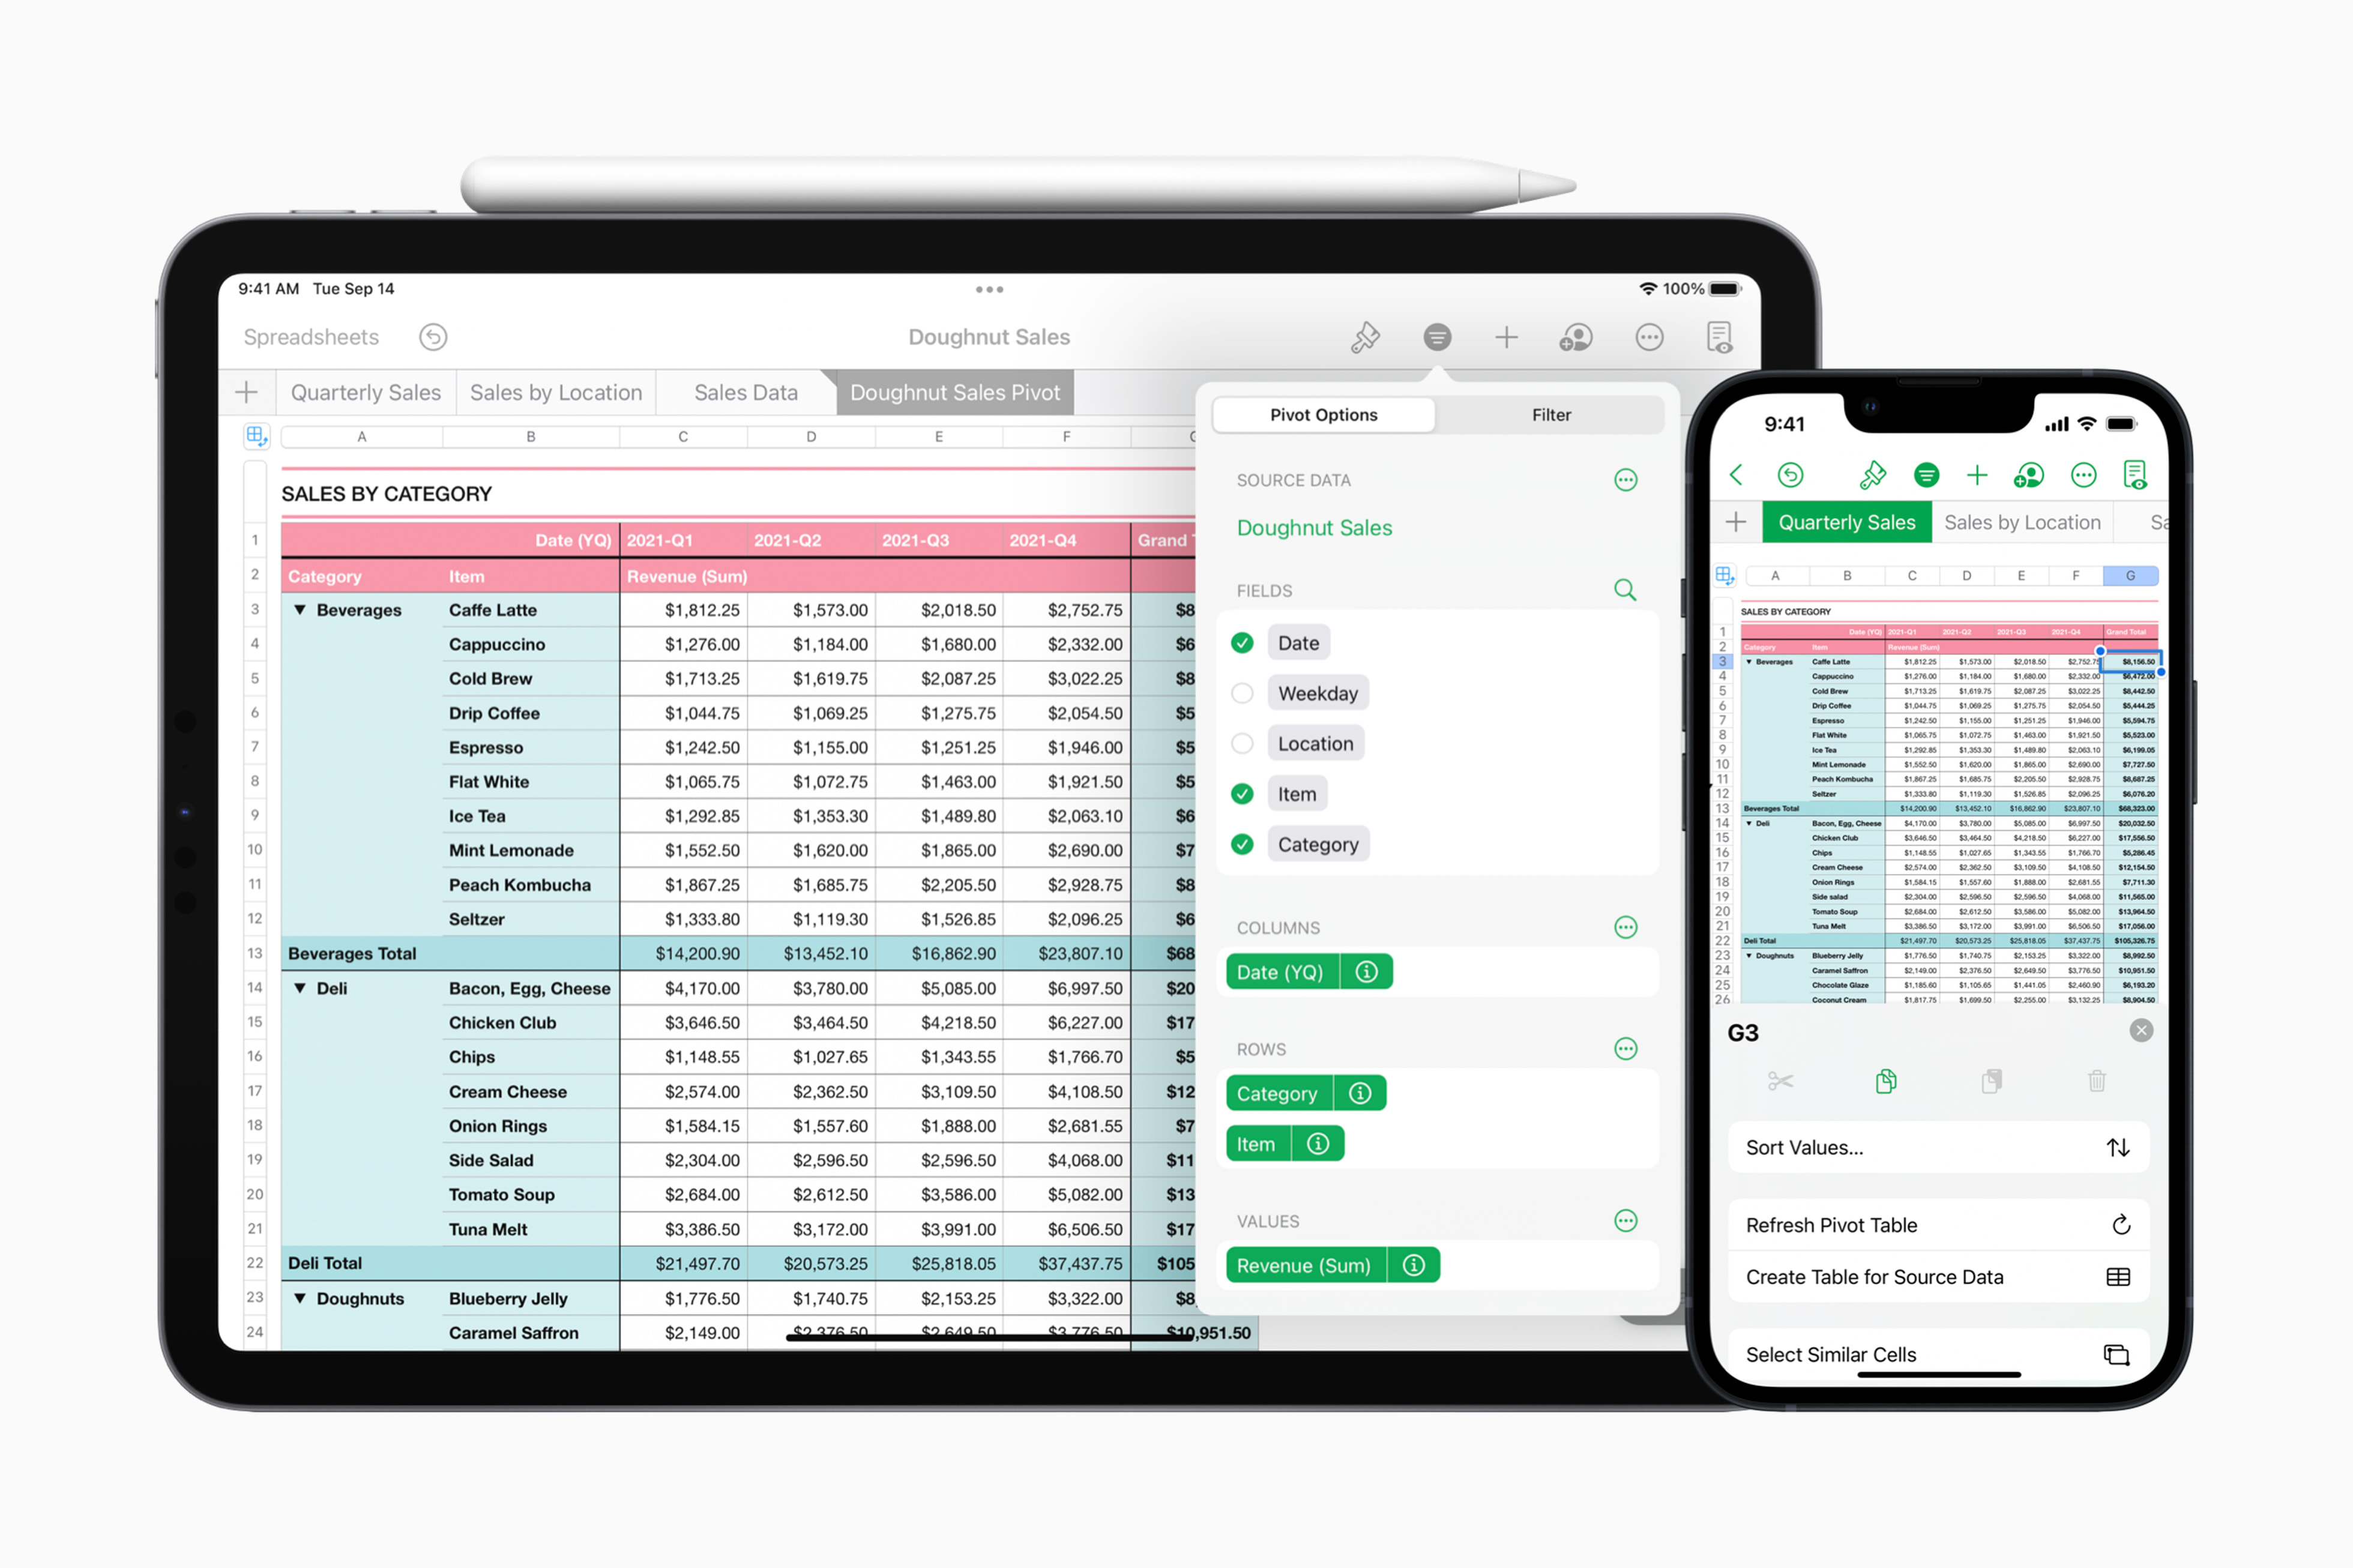 Apple unveils new features in iWork suite of productivity apps - Apple